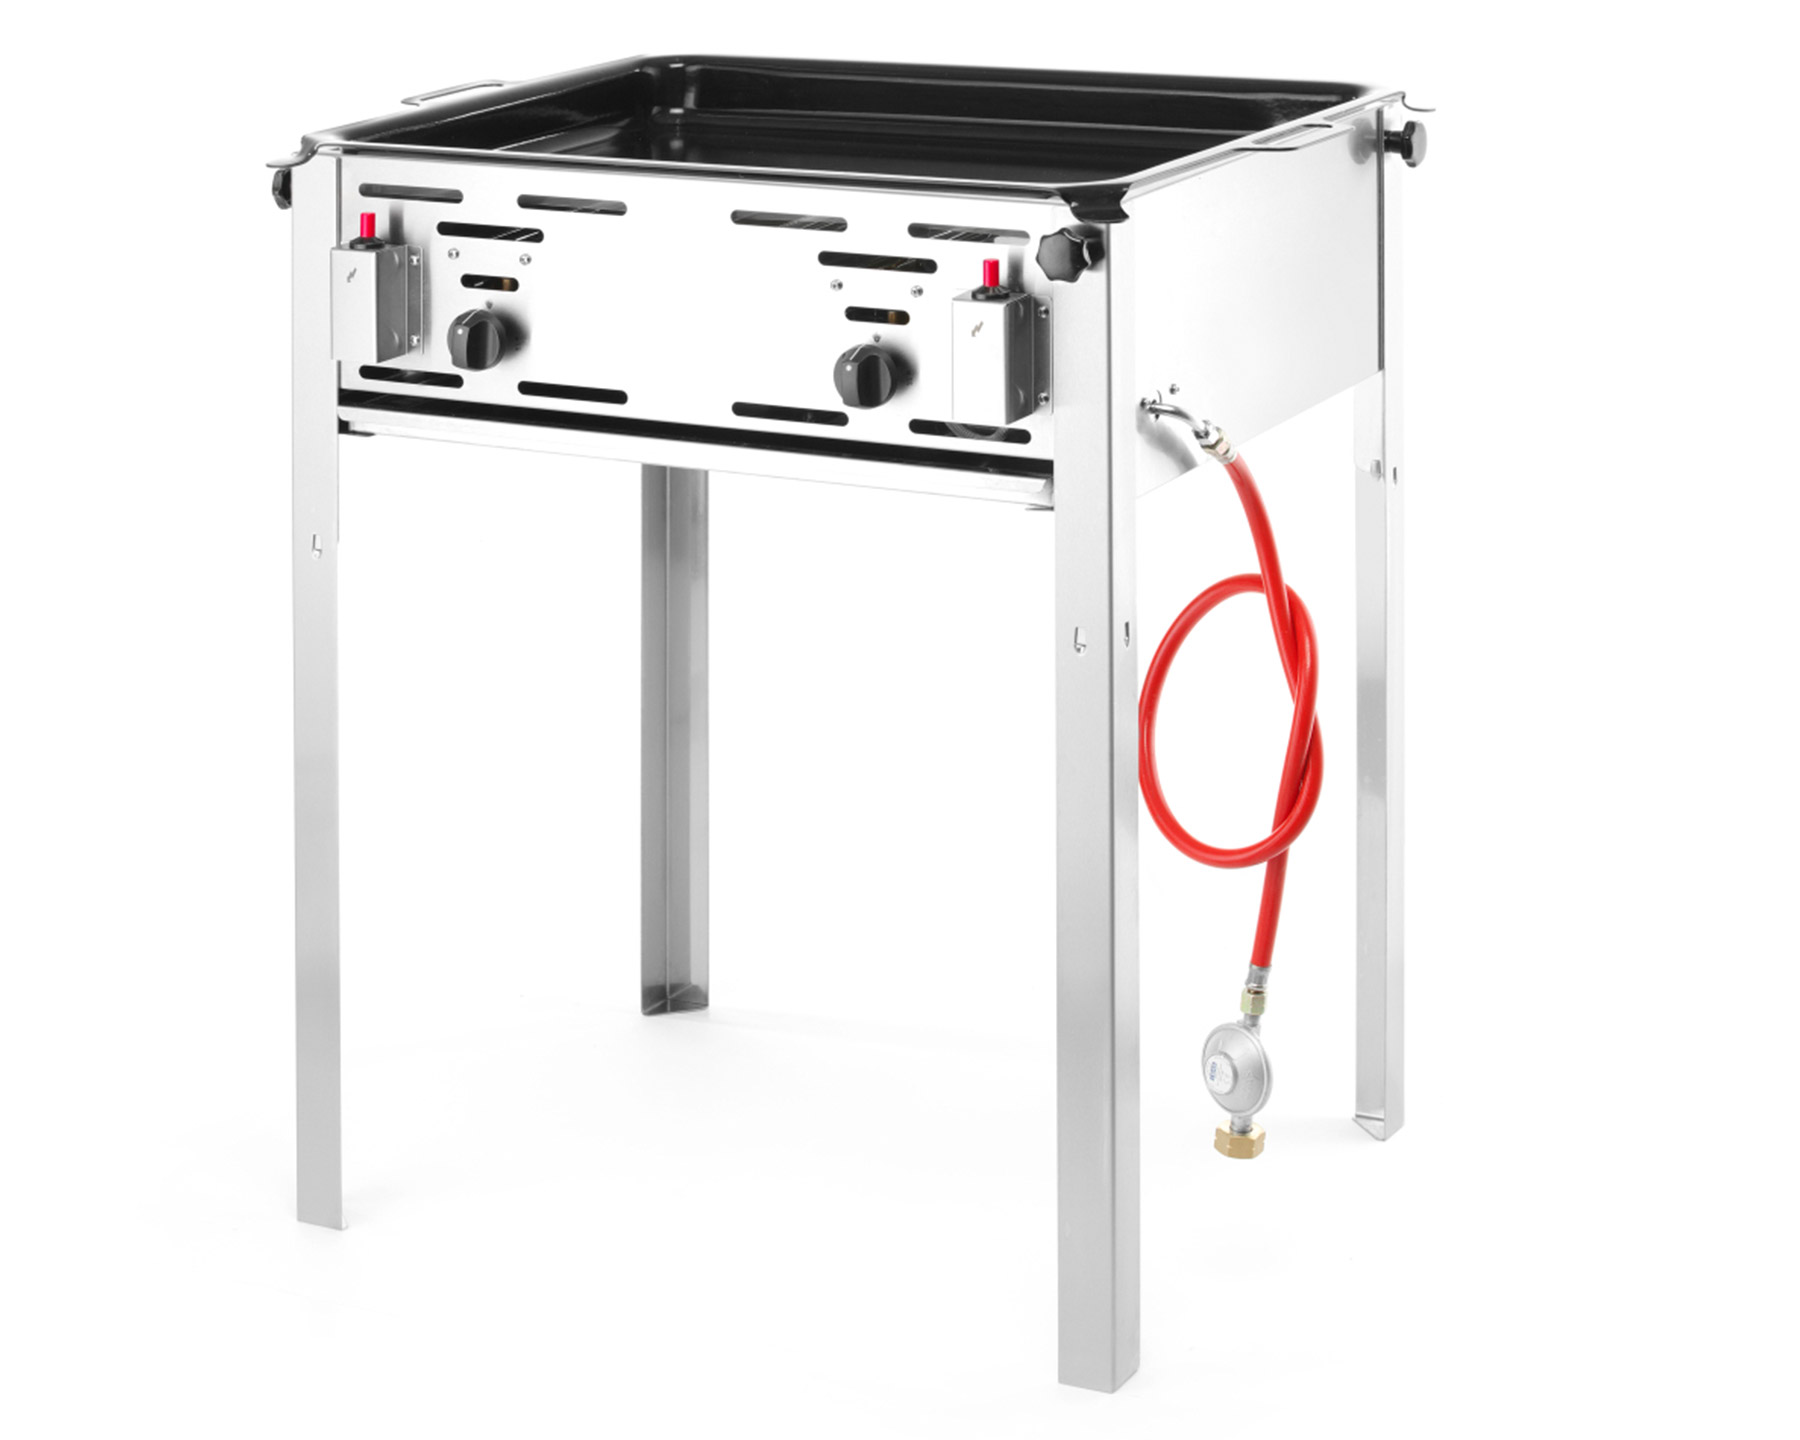 Hendi Grill Master Maxi BBQ | Slagers Barbecue | Grill Master Maxi voor Propaangas | BEST VERKOCHT!